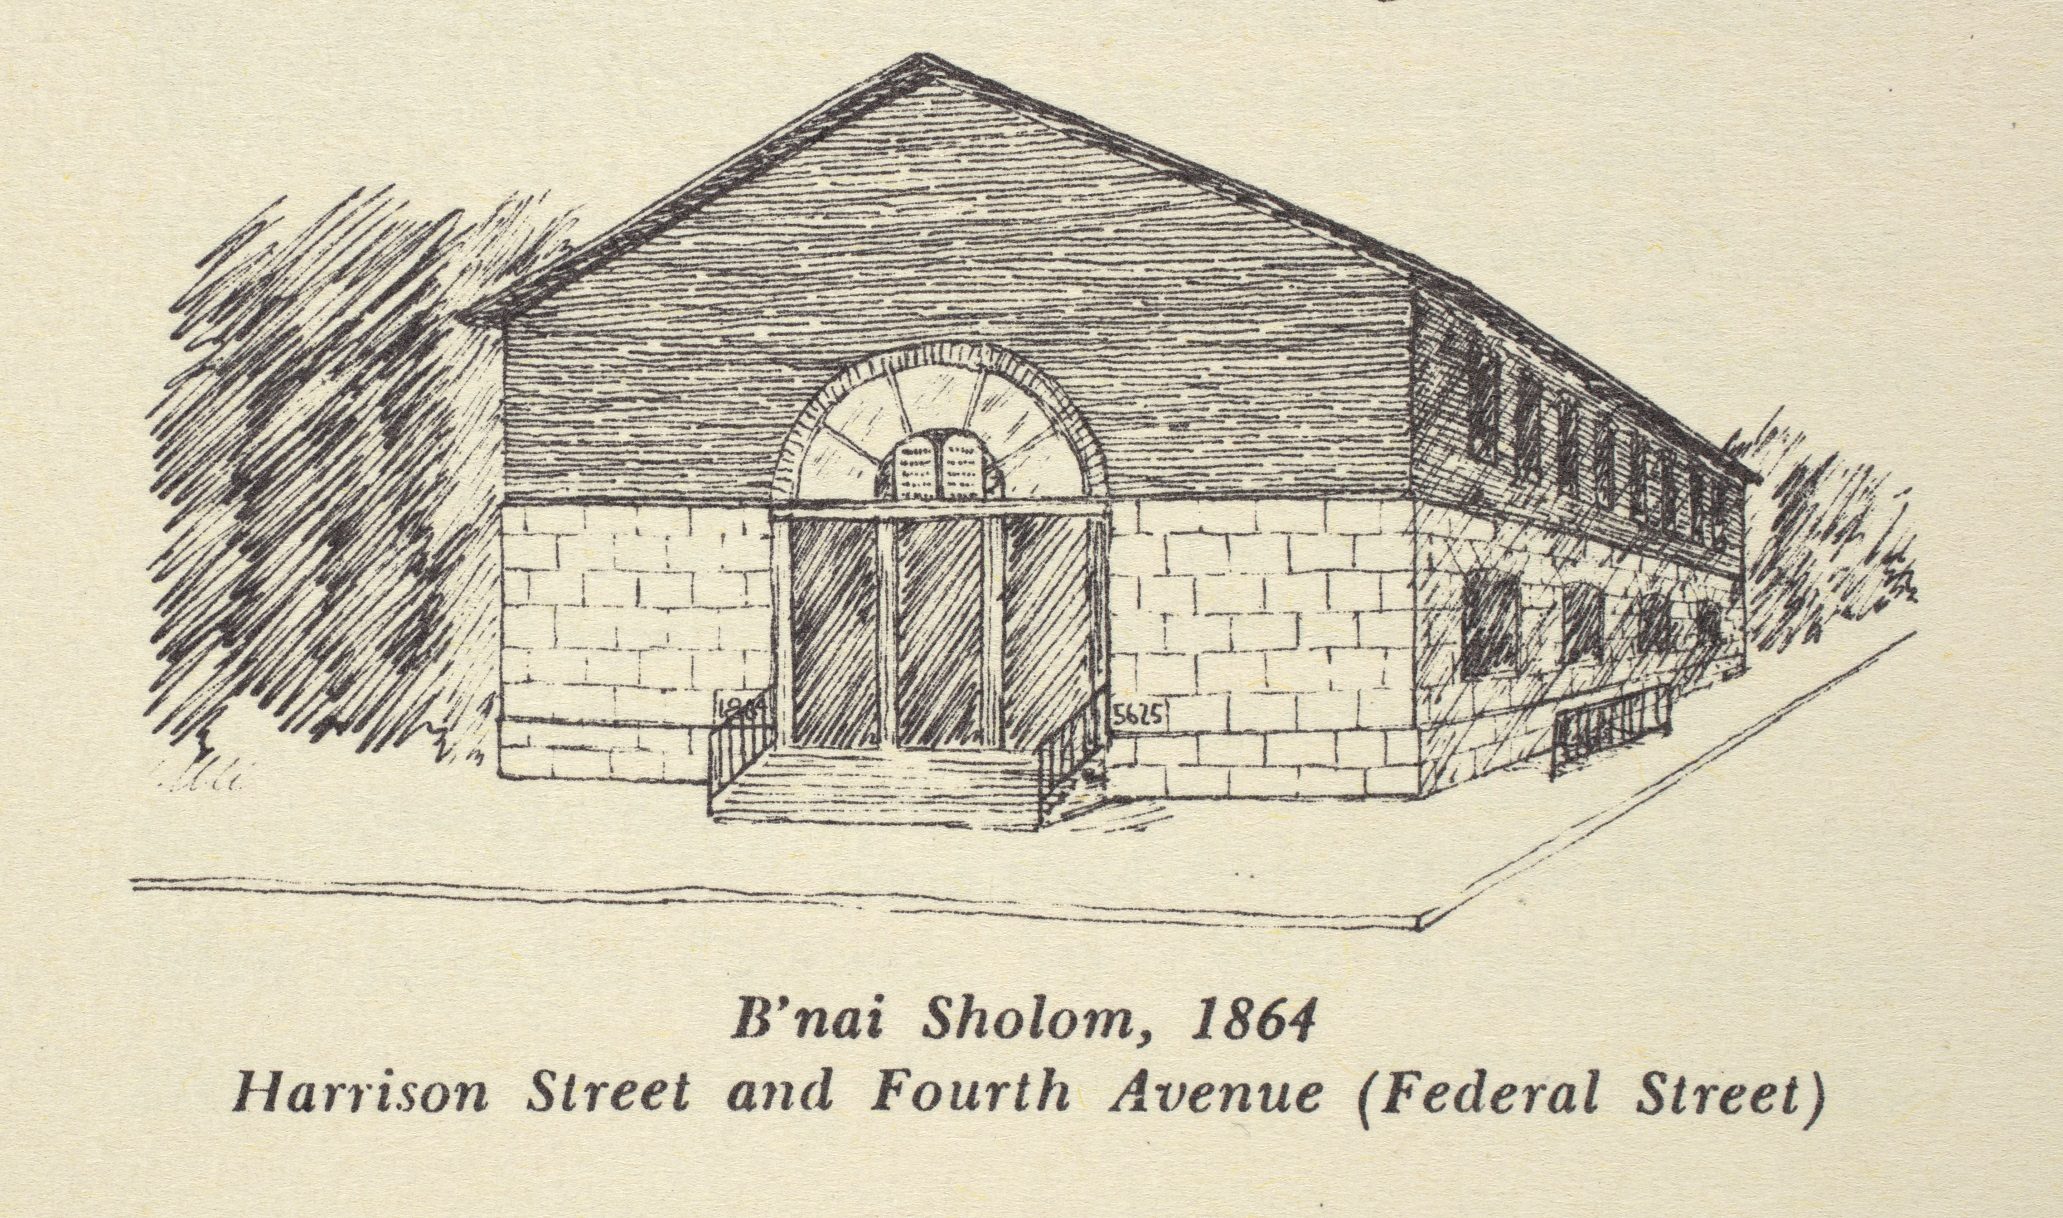 Architectural drawing of exterior of B'nai Sholom, Harrison Street and Fourth Avenue (Federal Street), Chicago, Illinois, 1864. Published on page 14 of Our First Century, 1852-1952: Temple Isaiah Israel, the United Congregations of B'nai Sholom